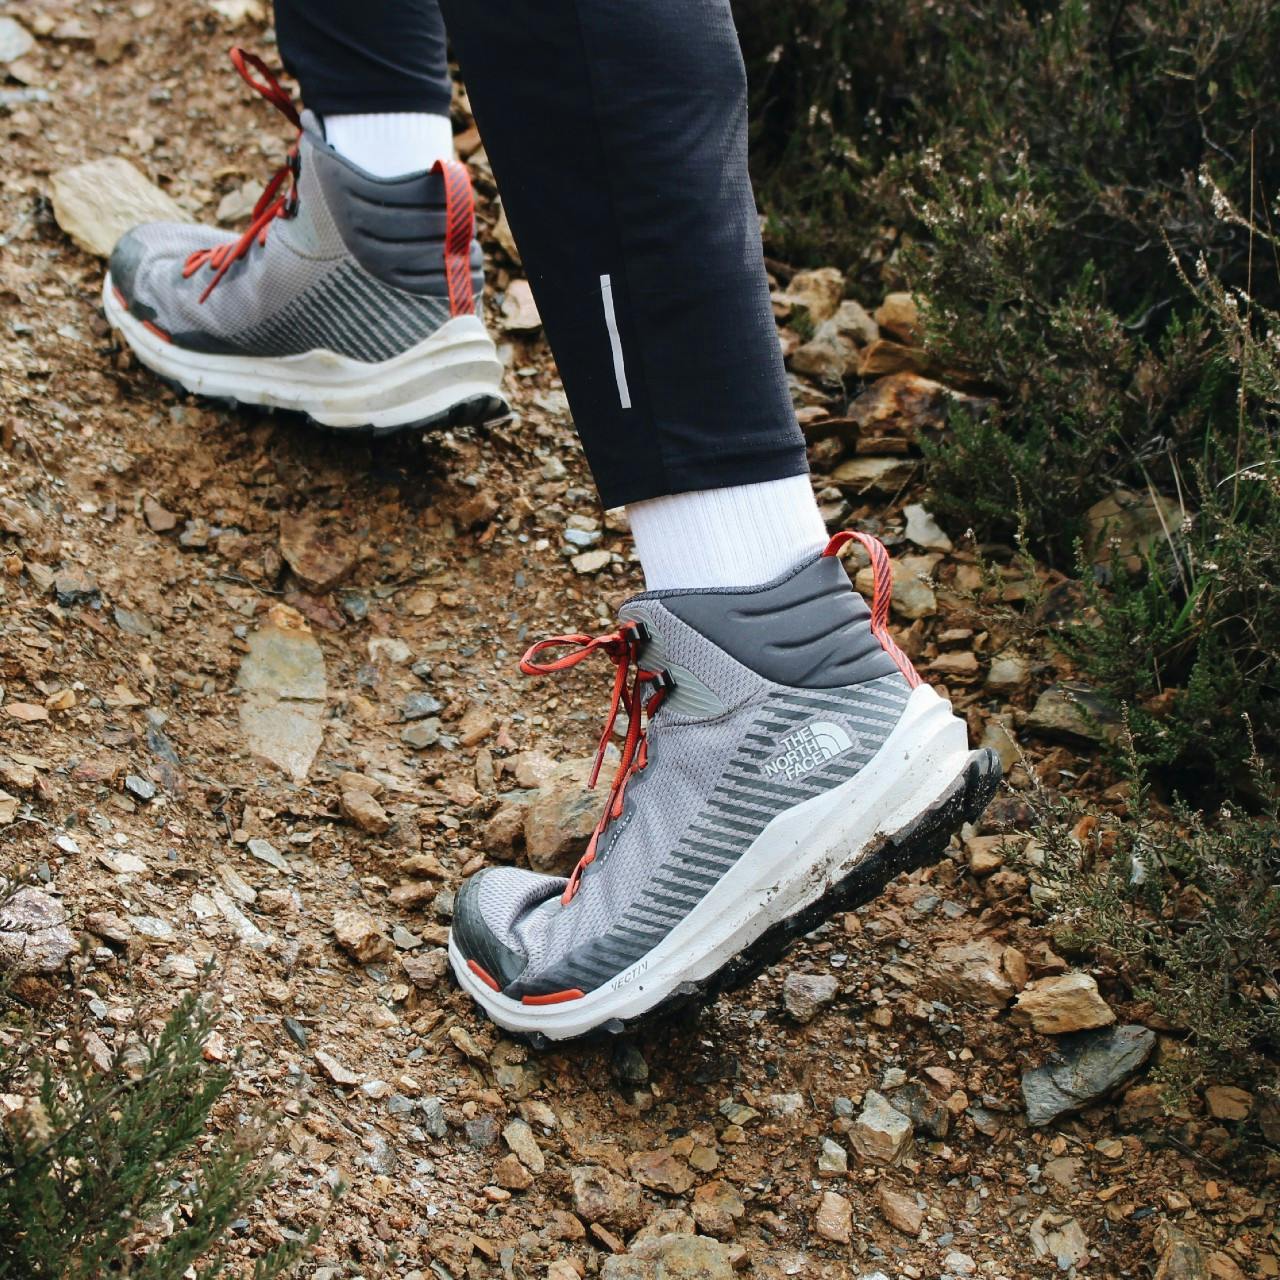 article2-thenorth-face-sportsshoes-discover-your-trail-komoot-collection-cornwall